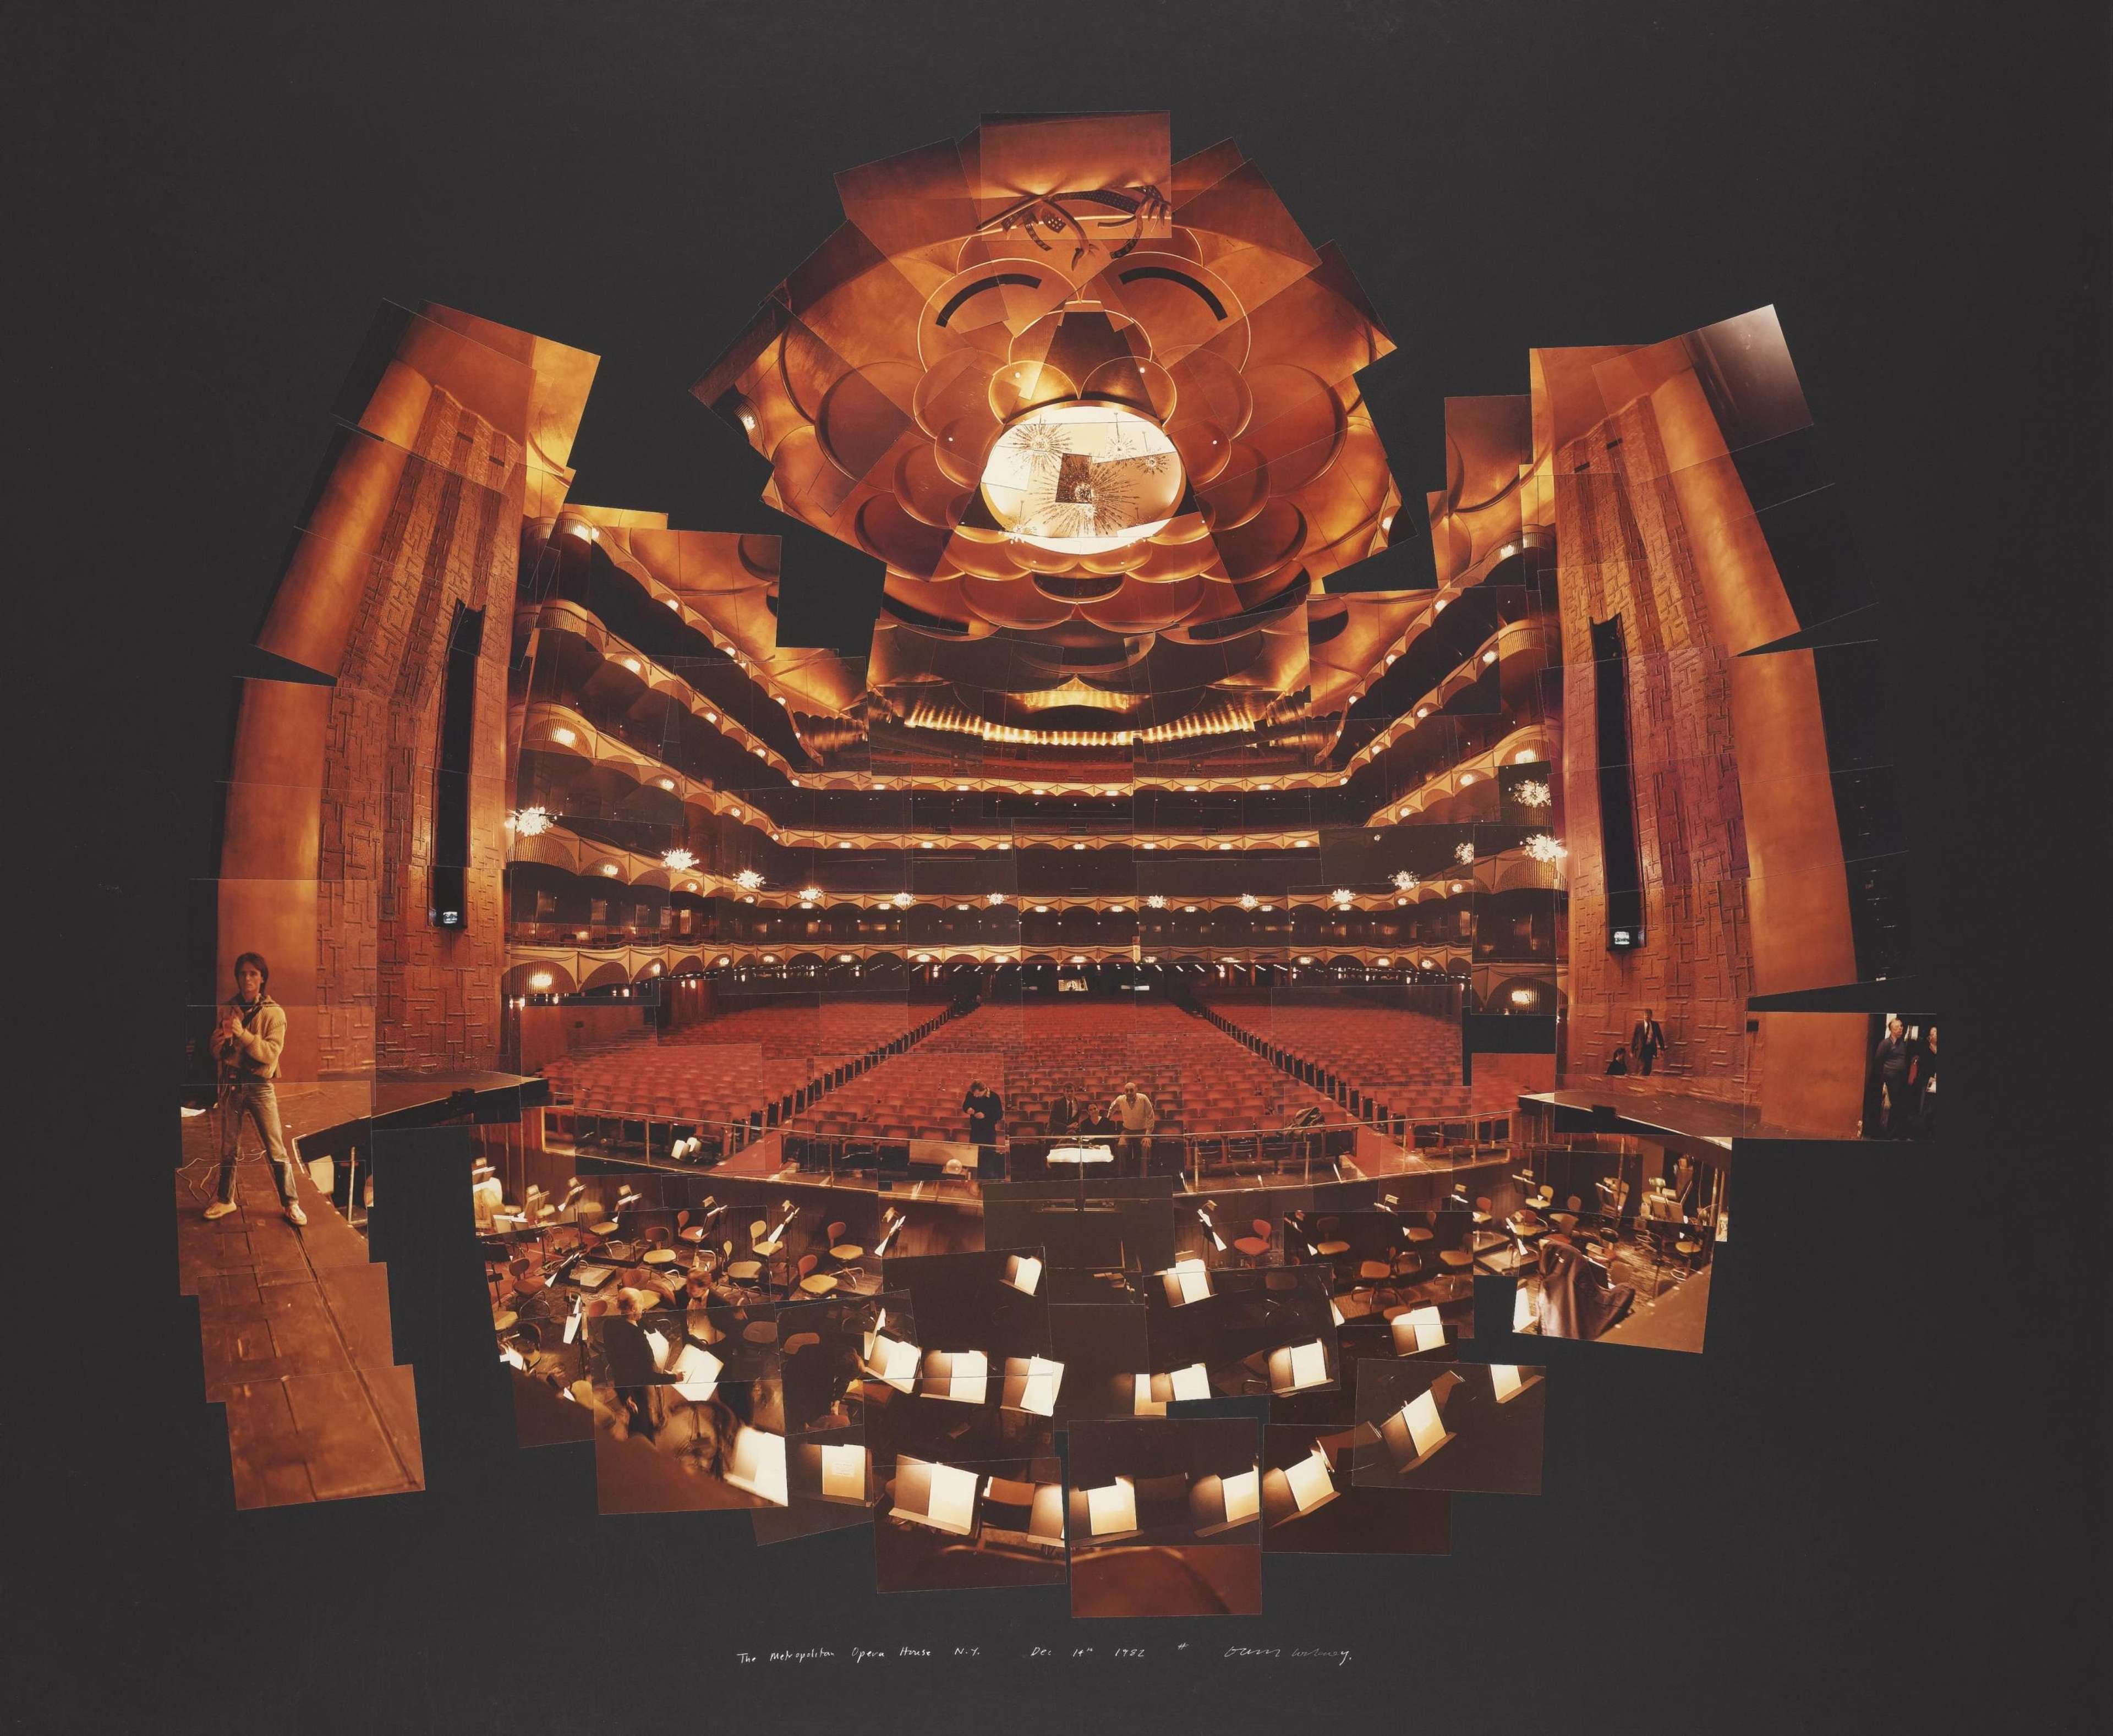 This photocollage by David Hockney shows the Metropolitan Opera House, as seen from the stage.